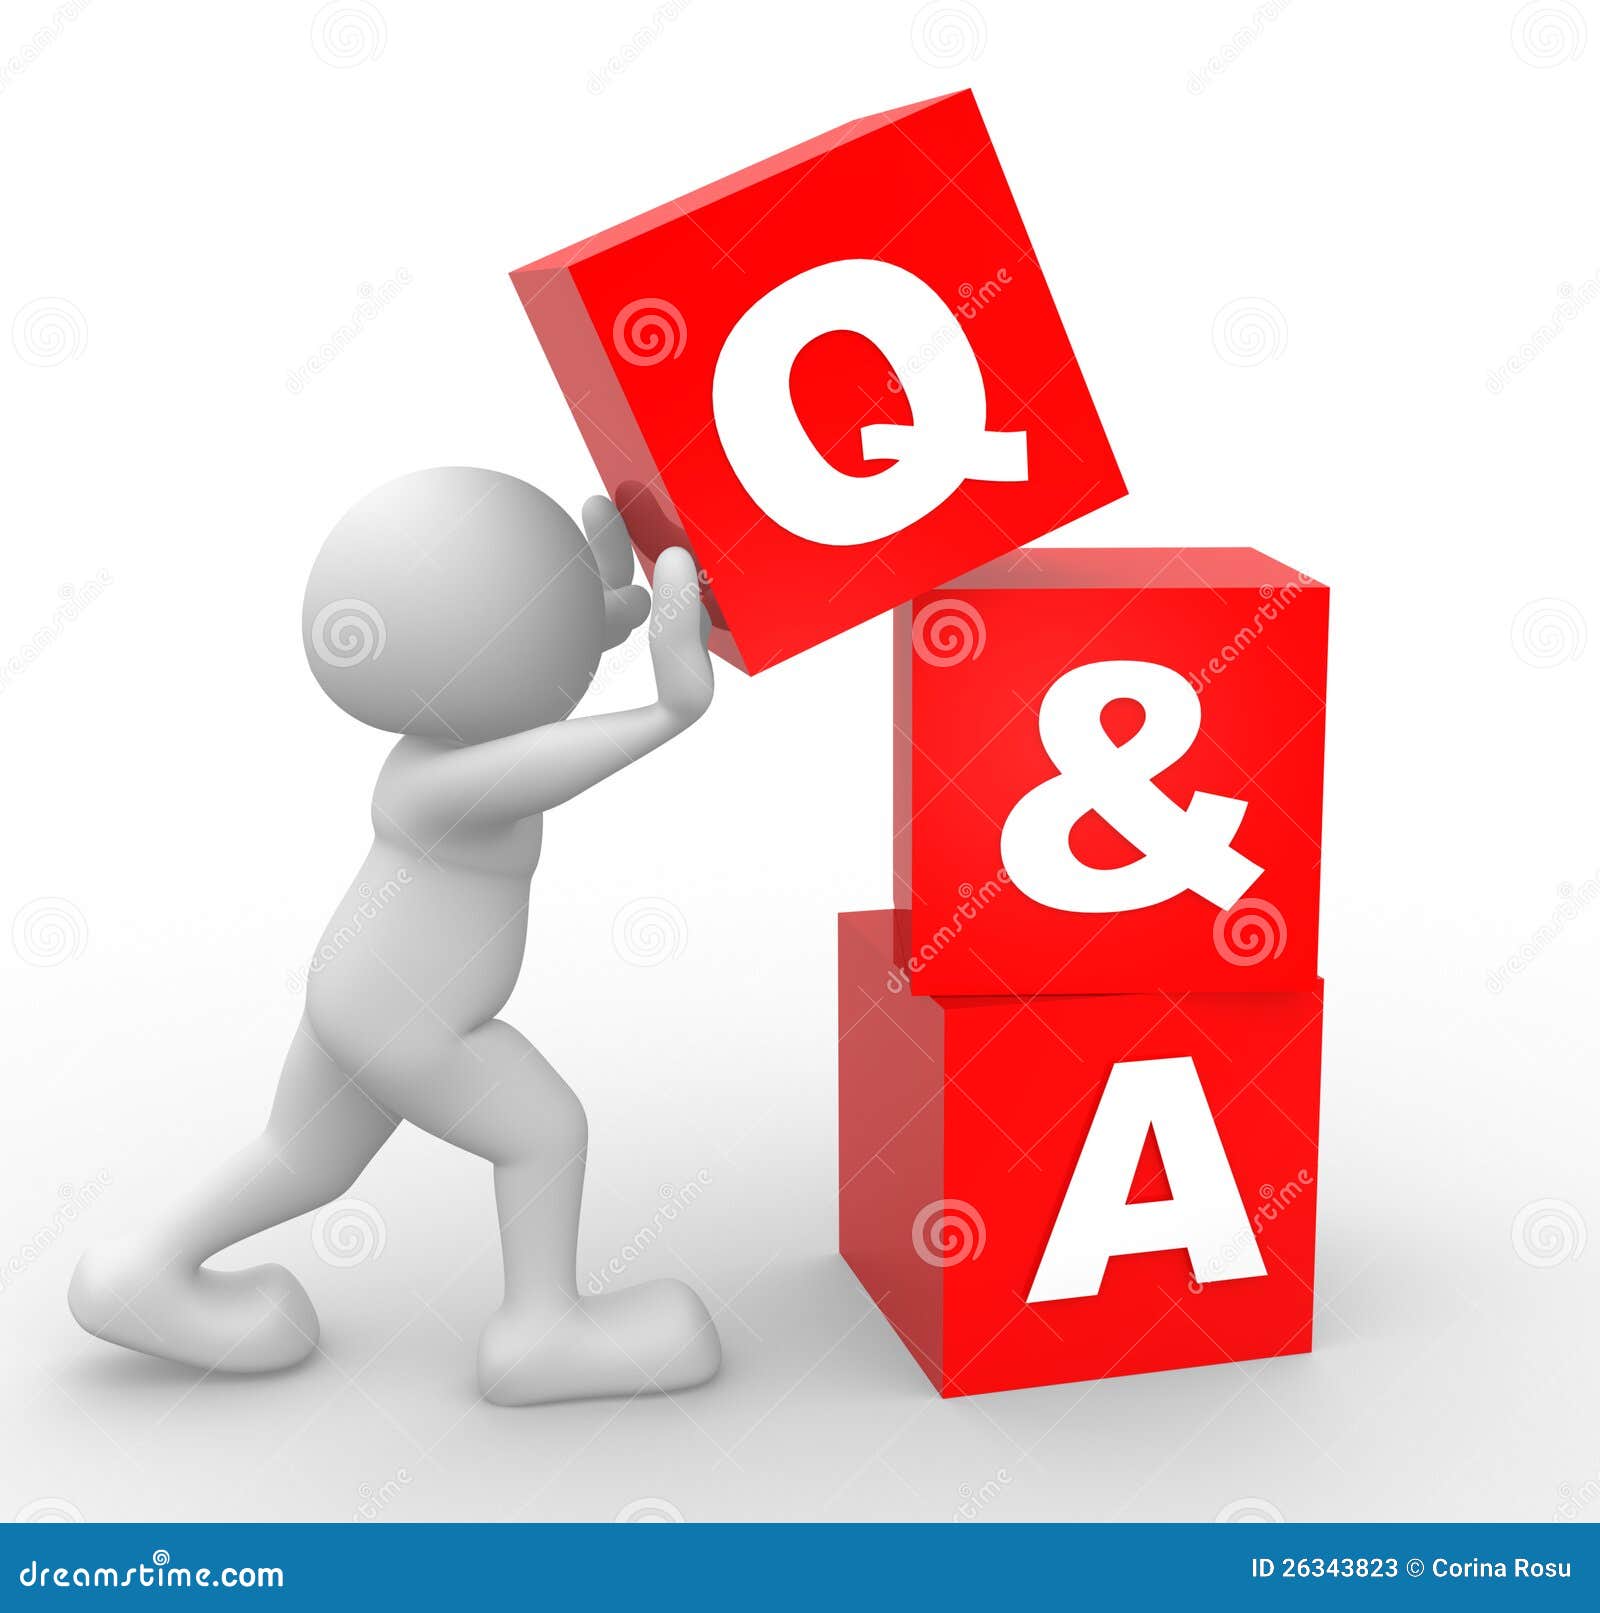 clipart of question and answer - photo #48